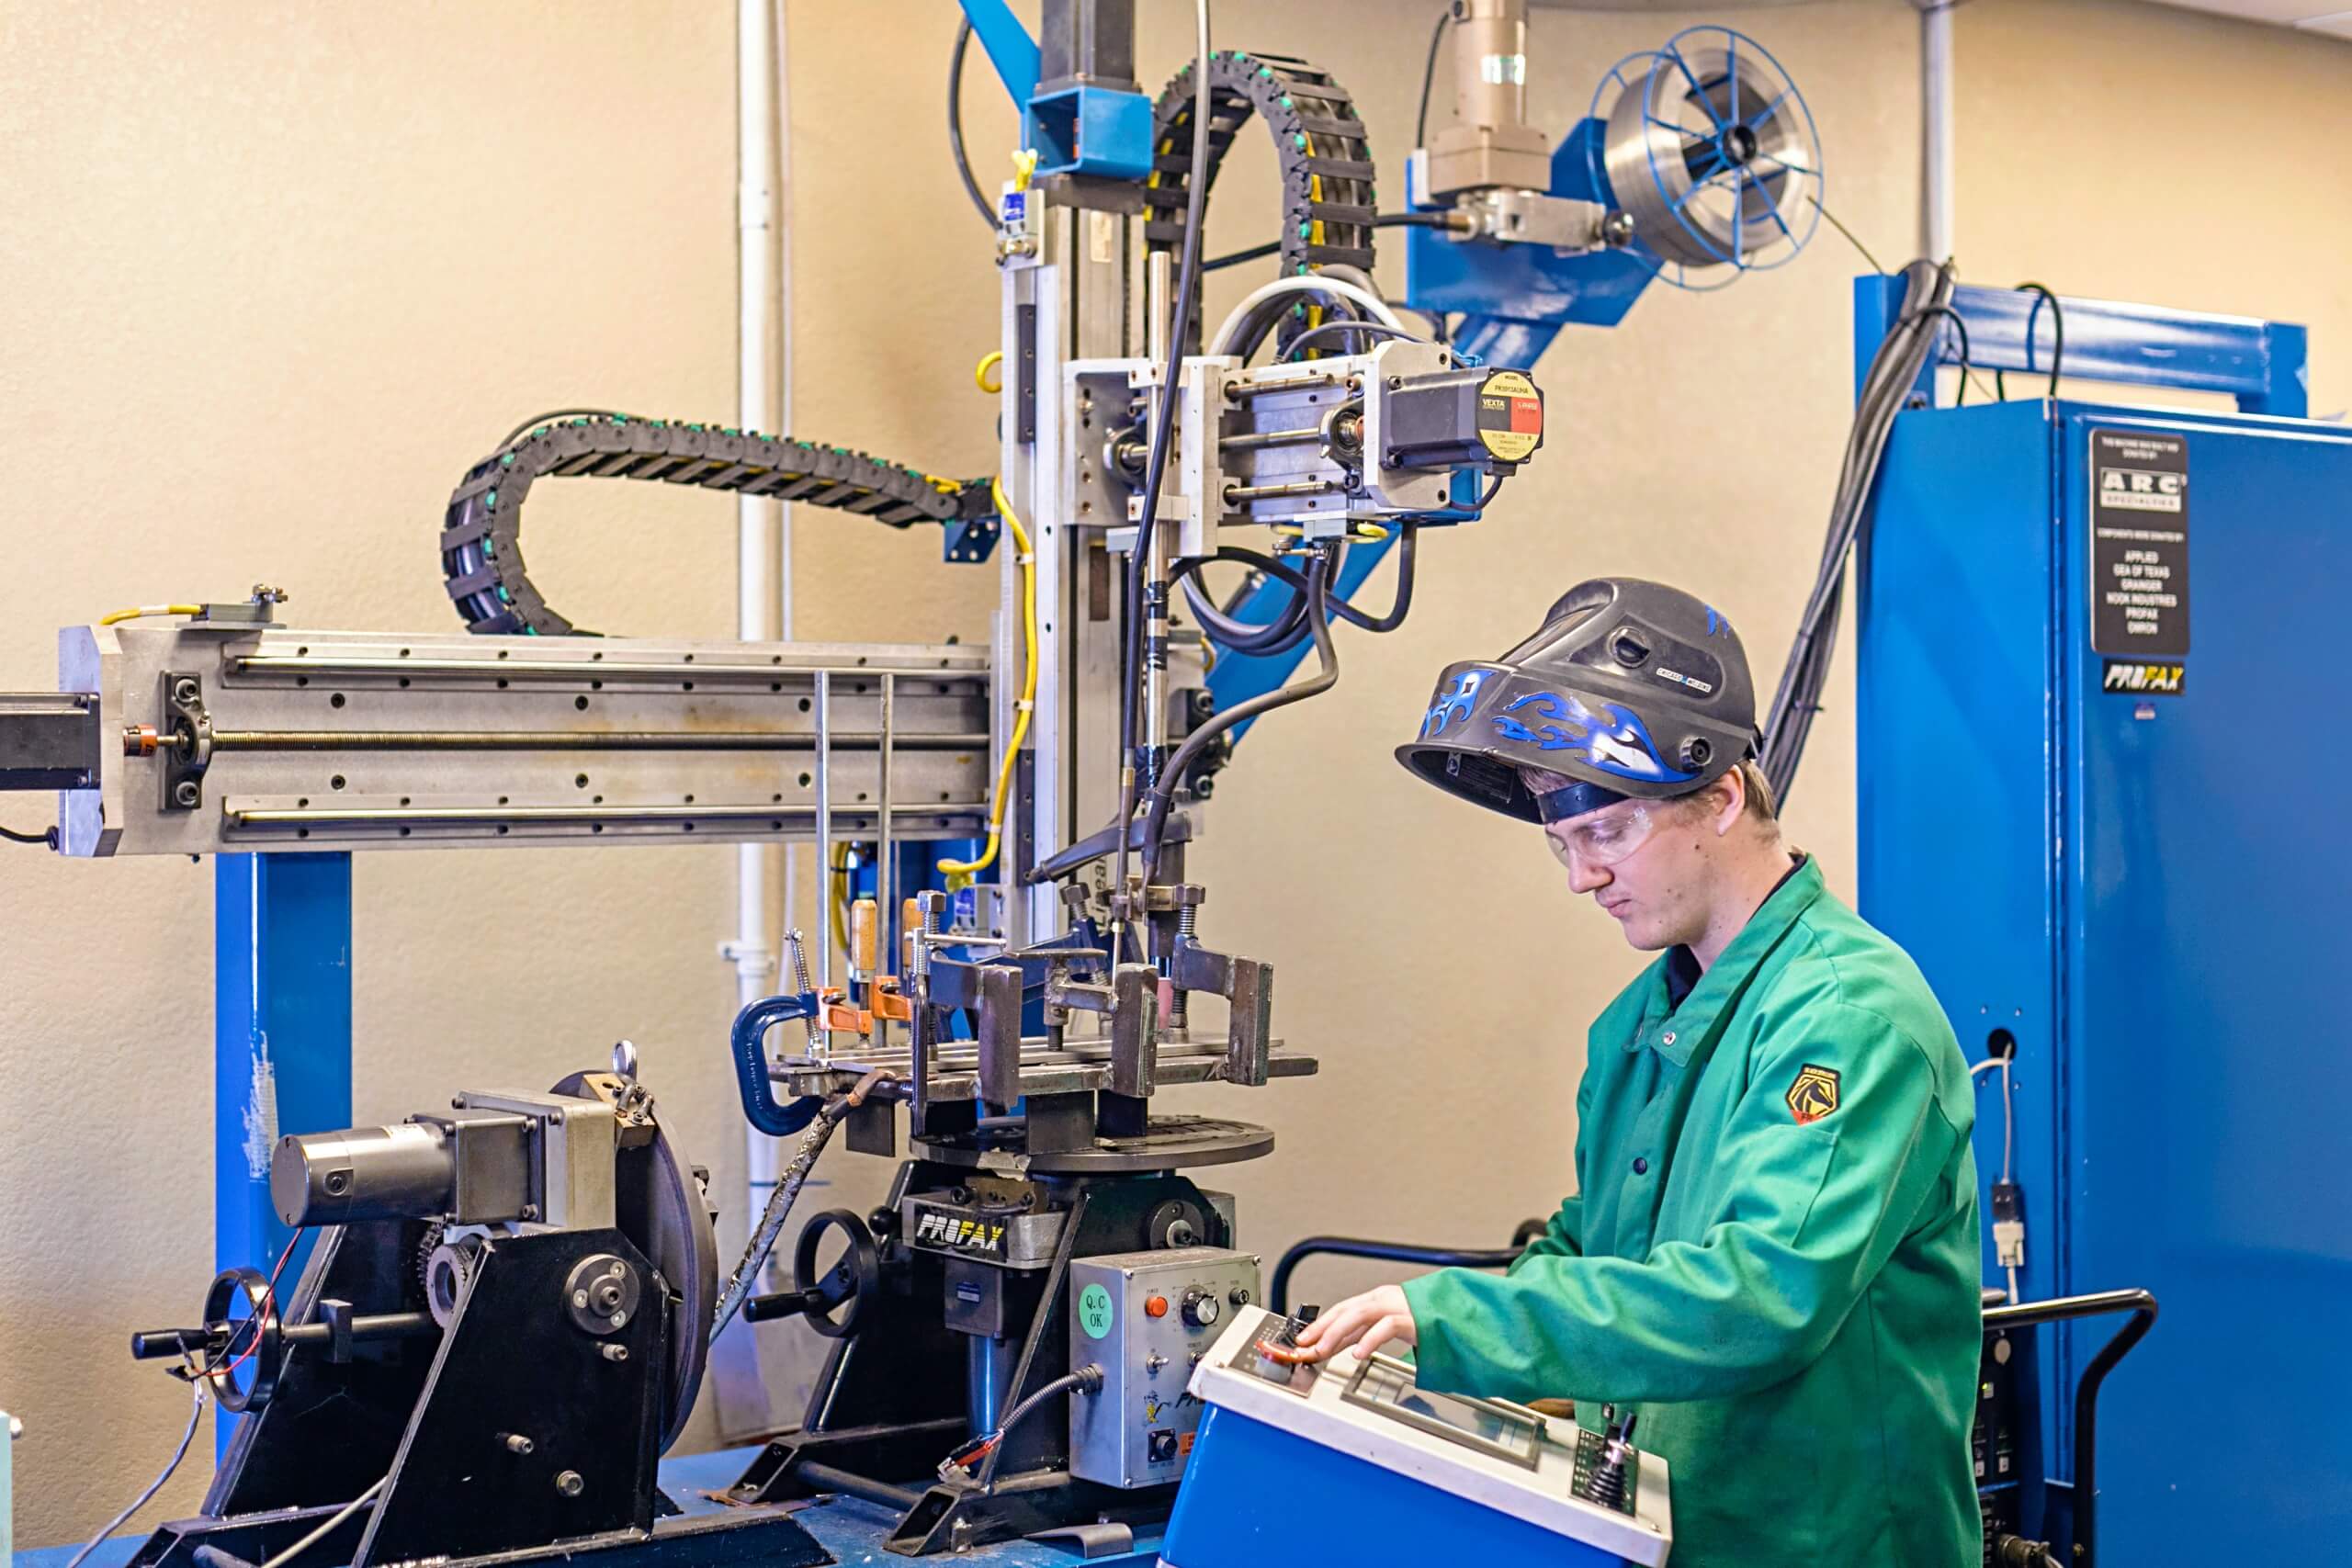 A welding engineering student uses welding lab machinery